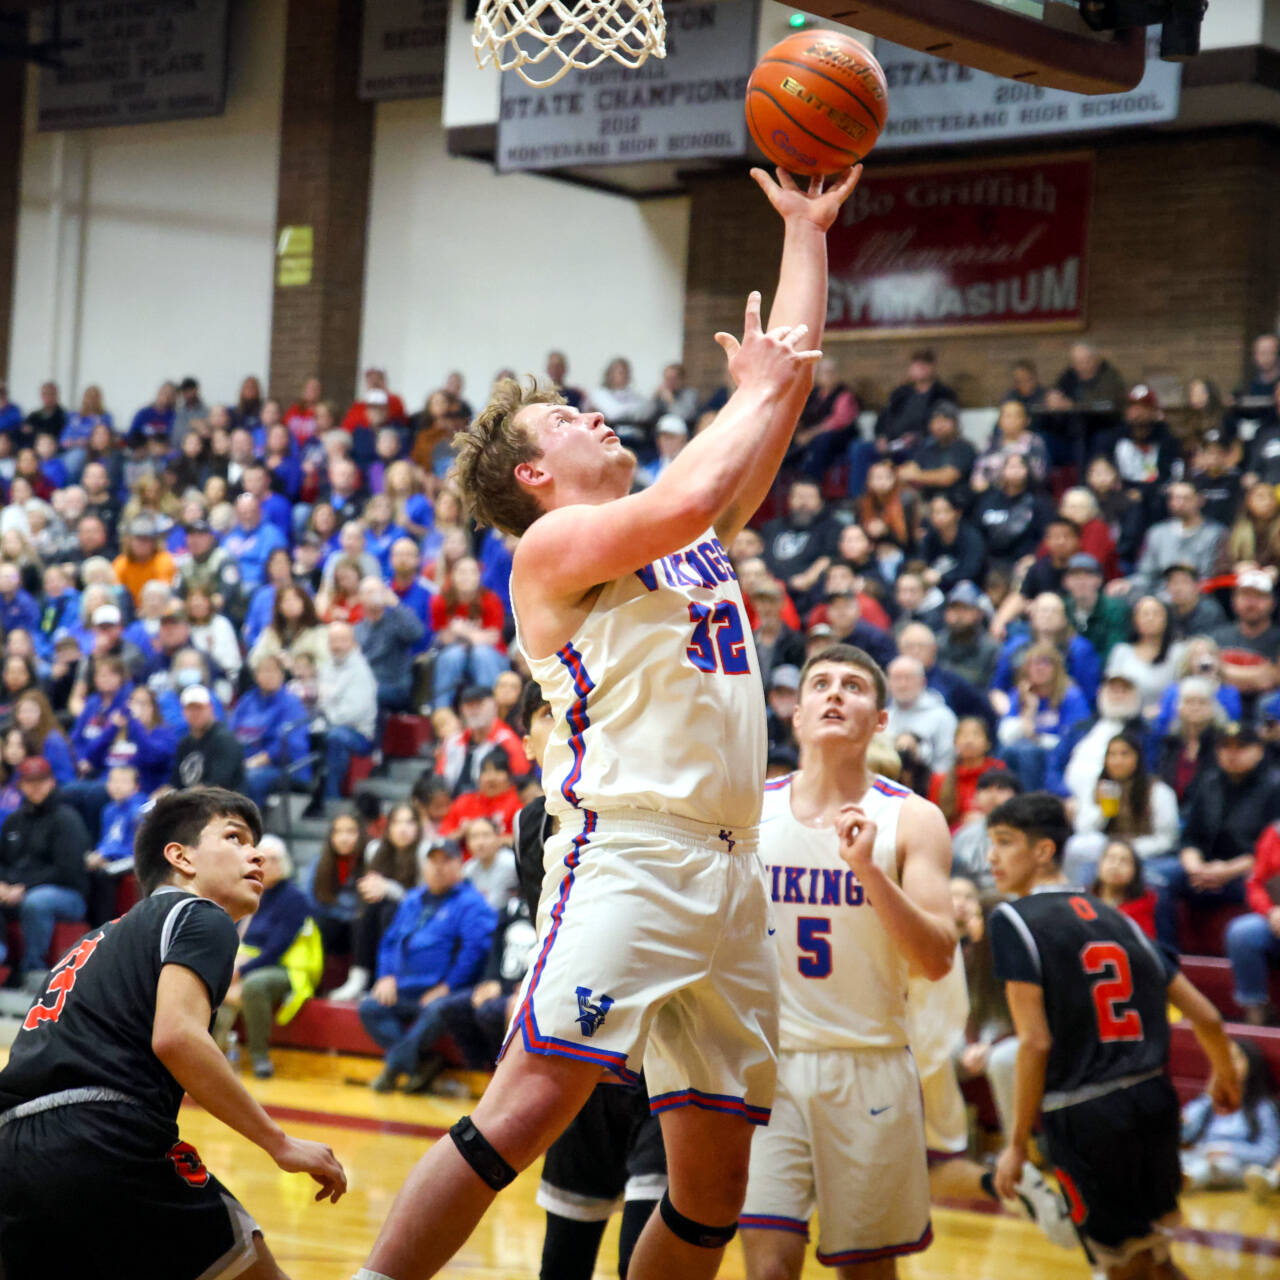 PHOTO BY LARRY BALE Willapa Valley senior Garrett Keeton (32) rises for a layup during the Vikings’ 62-54 win over Oakville in the 1B District 4 Championship on Saturday at Montesano High School.